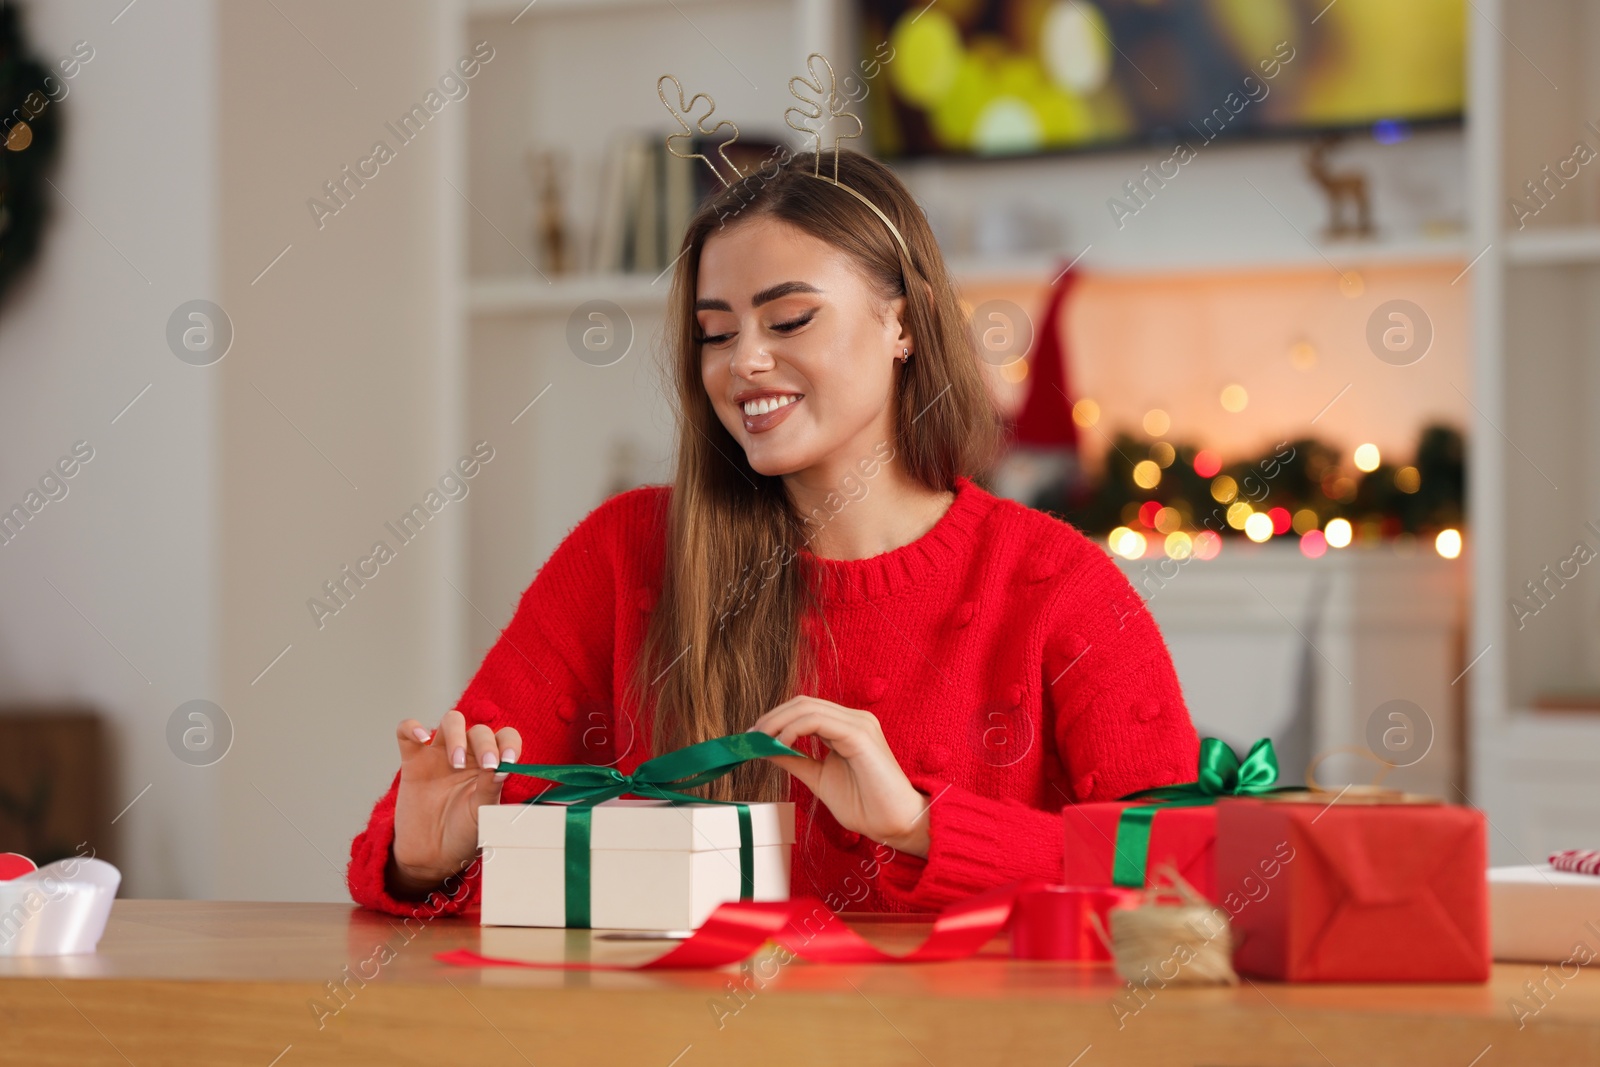 Photo of Beautiful young woman in deer headband decorating Christmas gift at table in room